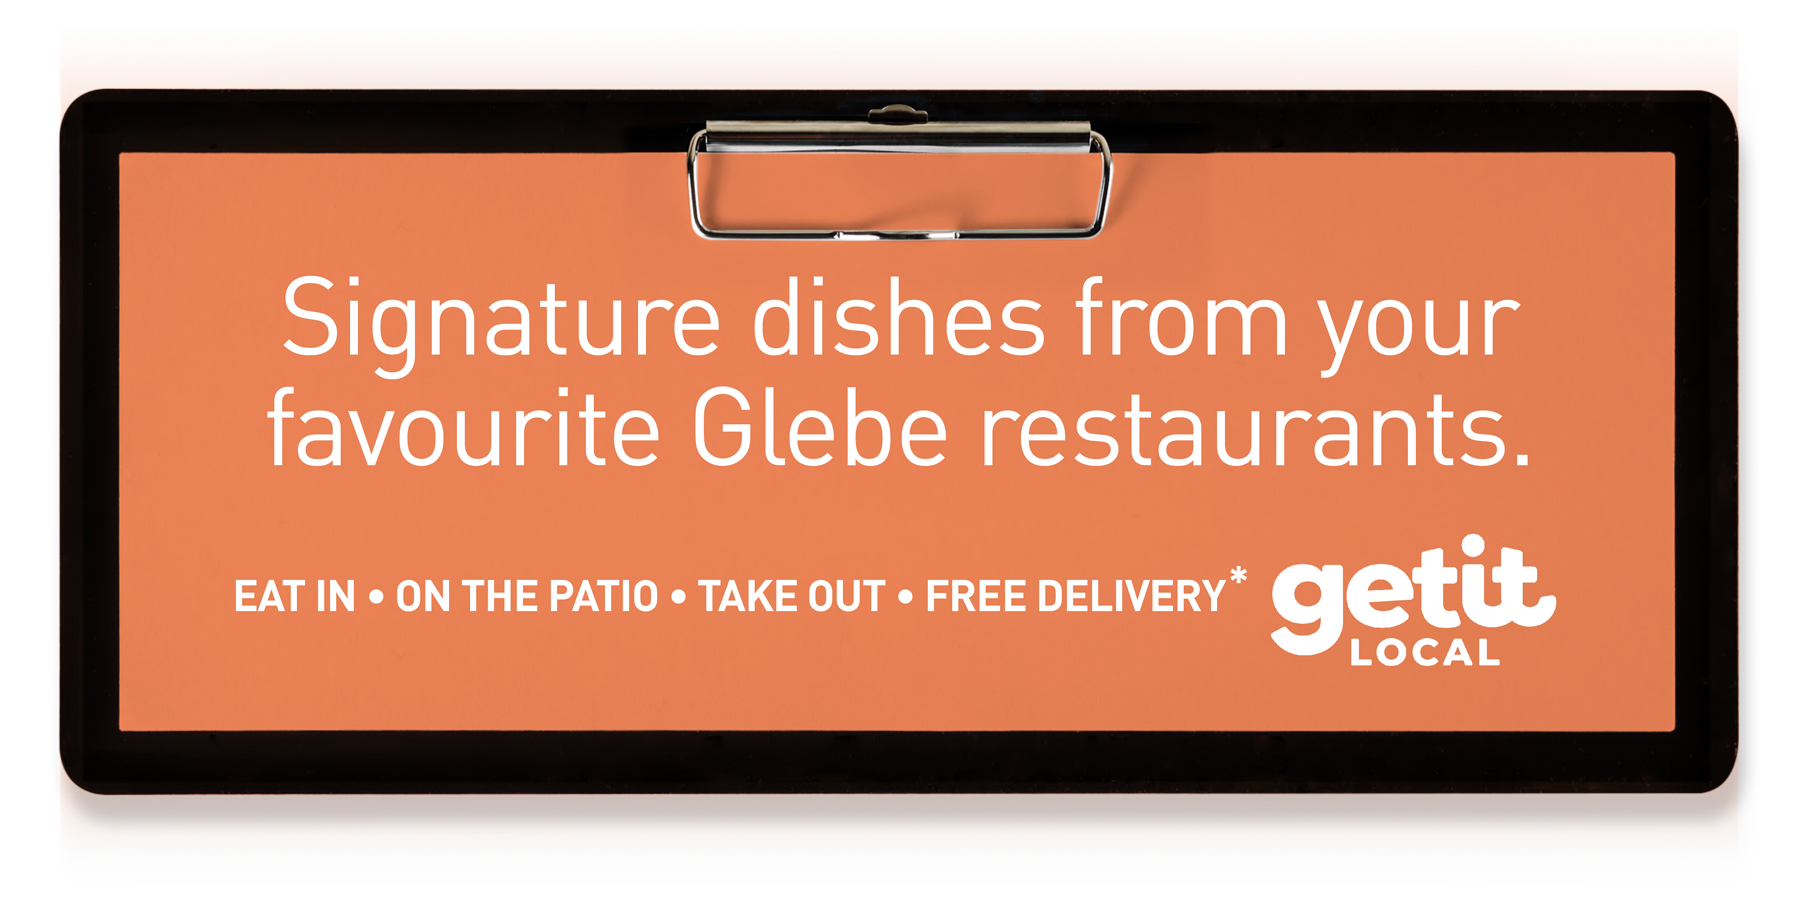 Signature dishes from your favourite Glebe restaurants. ON THE PATIO | TAKE OUT | FREE DELIVERY with Getit Local for participating locations only.